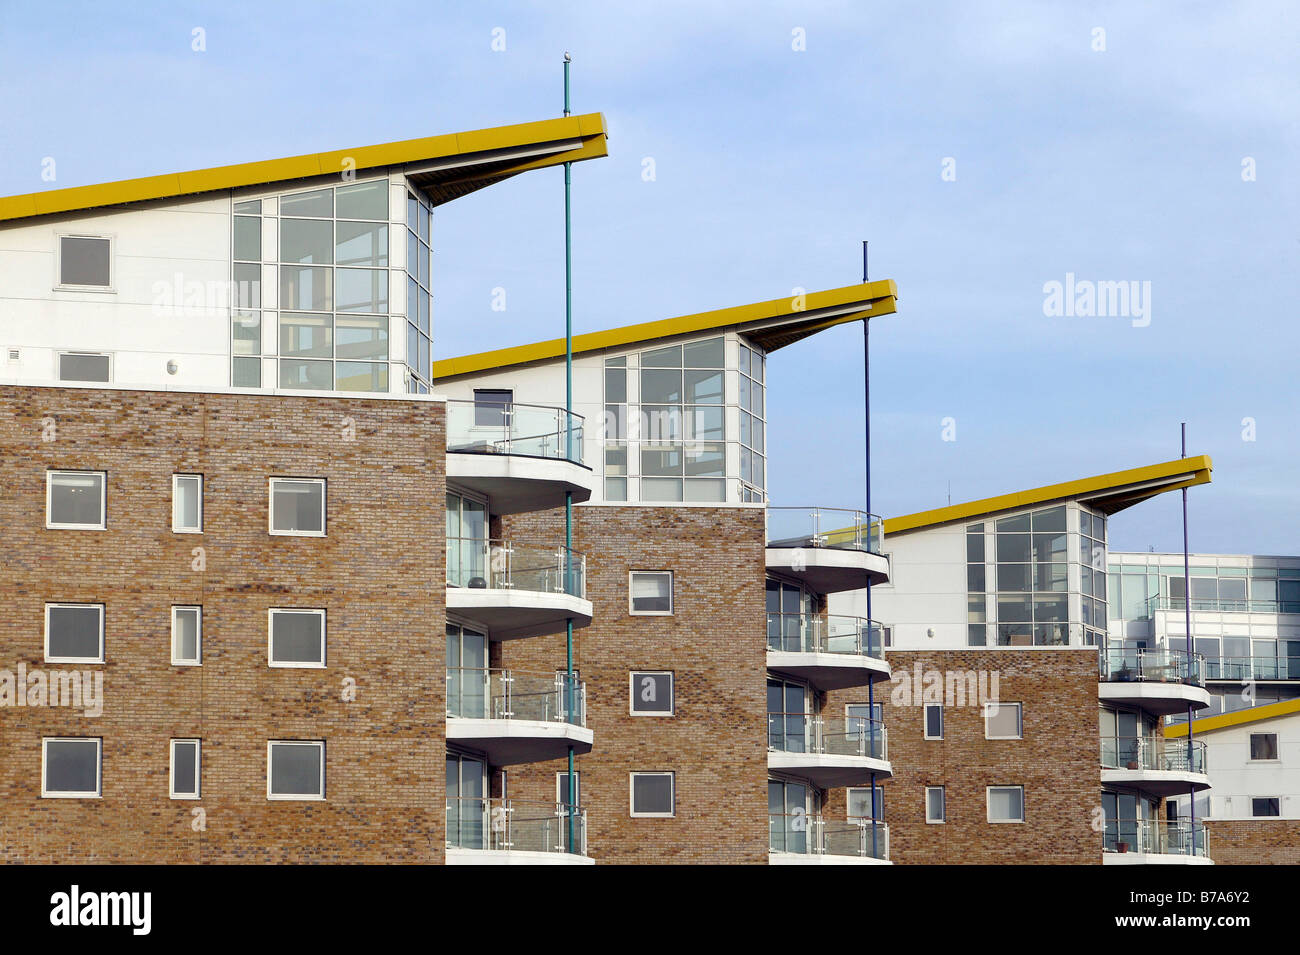 Residential houses in the Canary Wharf docklands, London, England, Great Britain, Europe Stock Photo